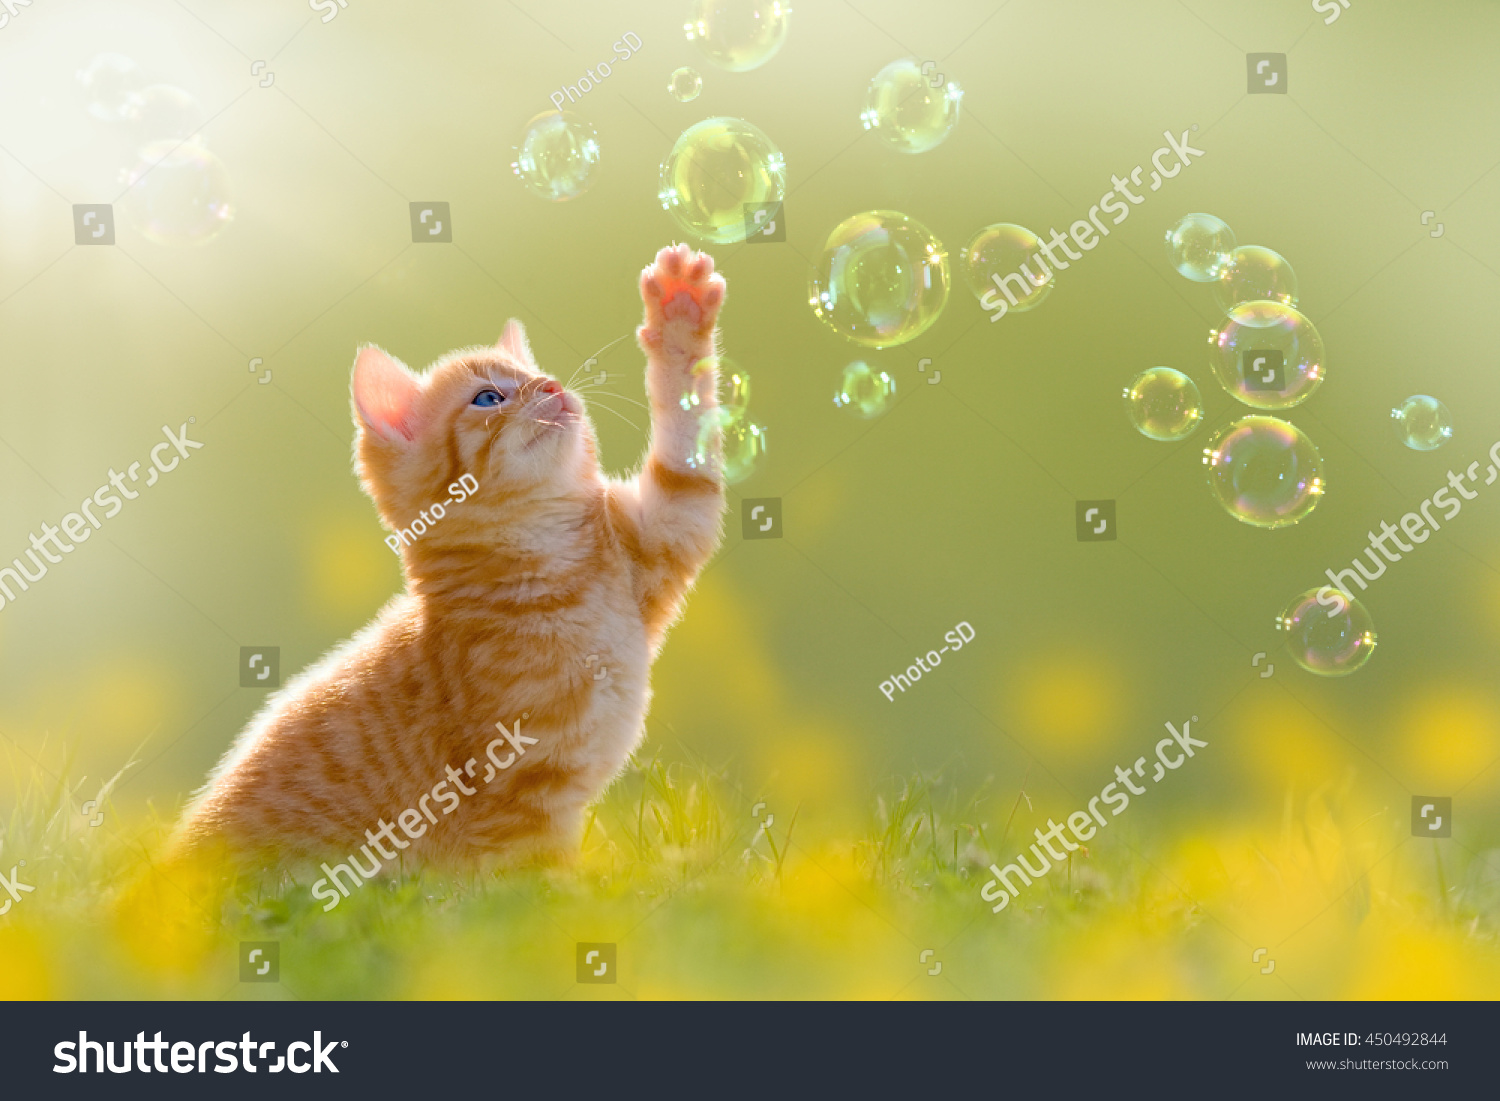 young kitten playing with soap bubbles, bubbles on green meadow #450492844